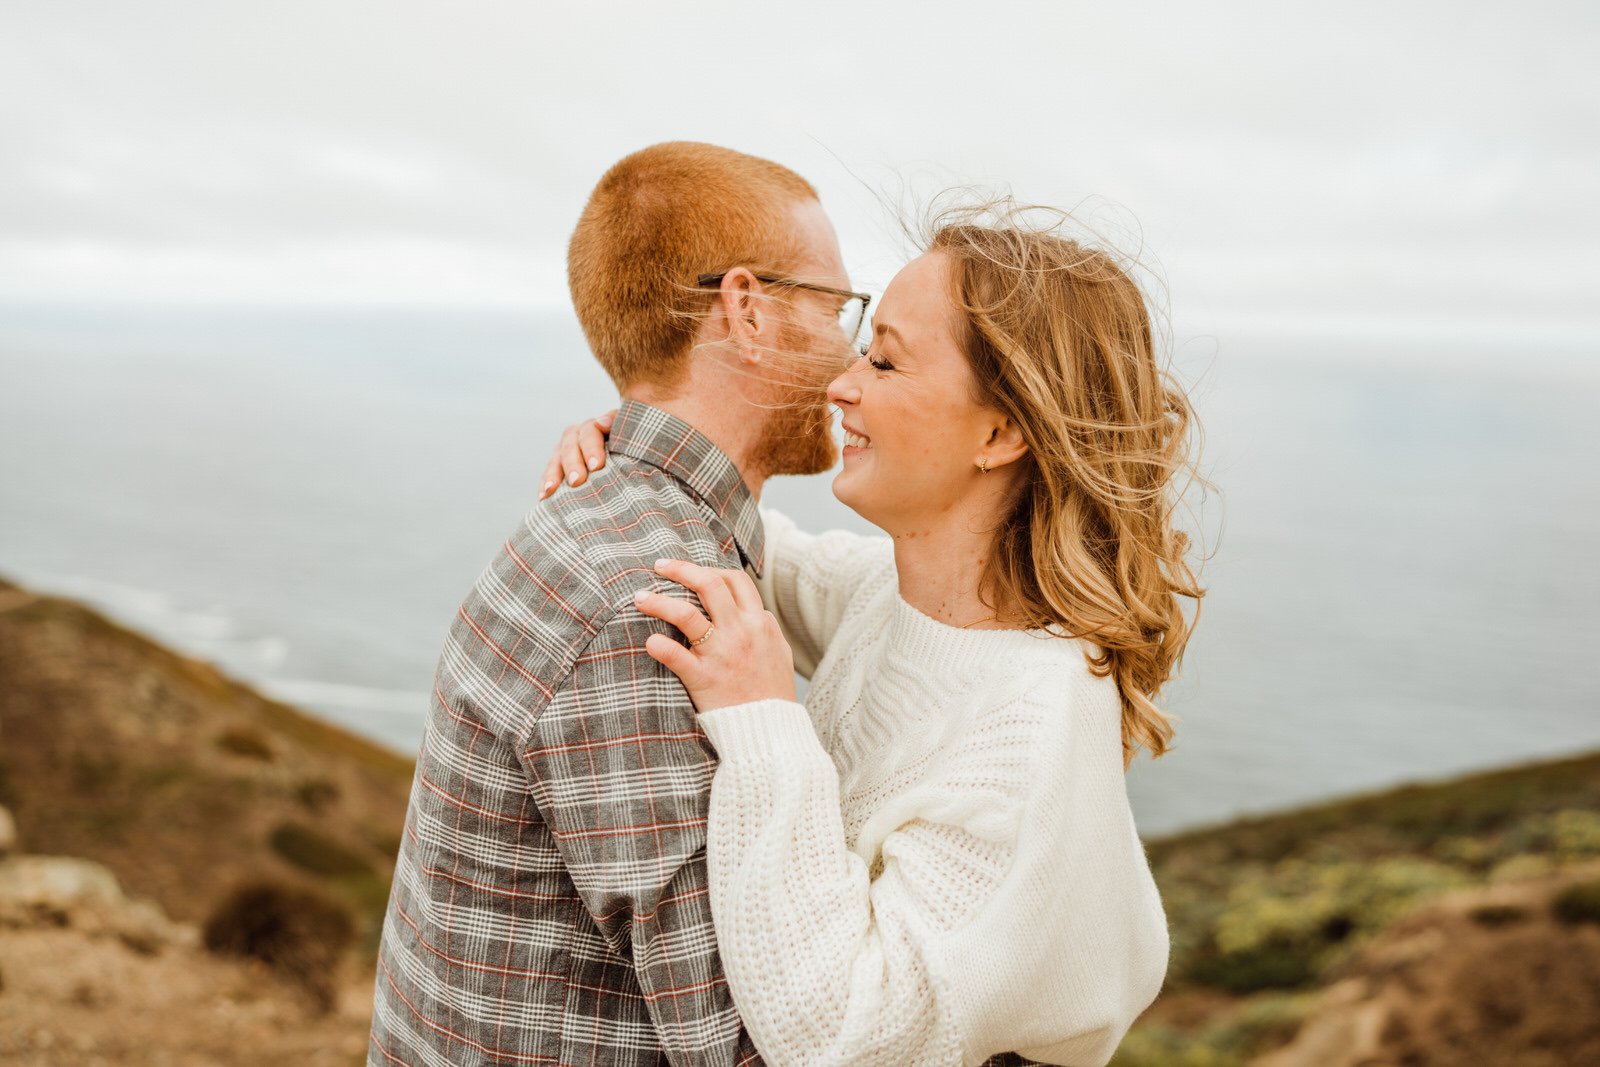 Happy, warm, playful Point Reyes Engagement Session - photos by Elopement Photographer Kept Record | www.keptrecord.com